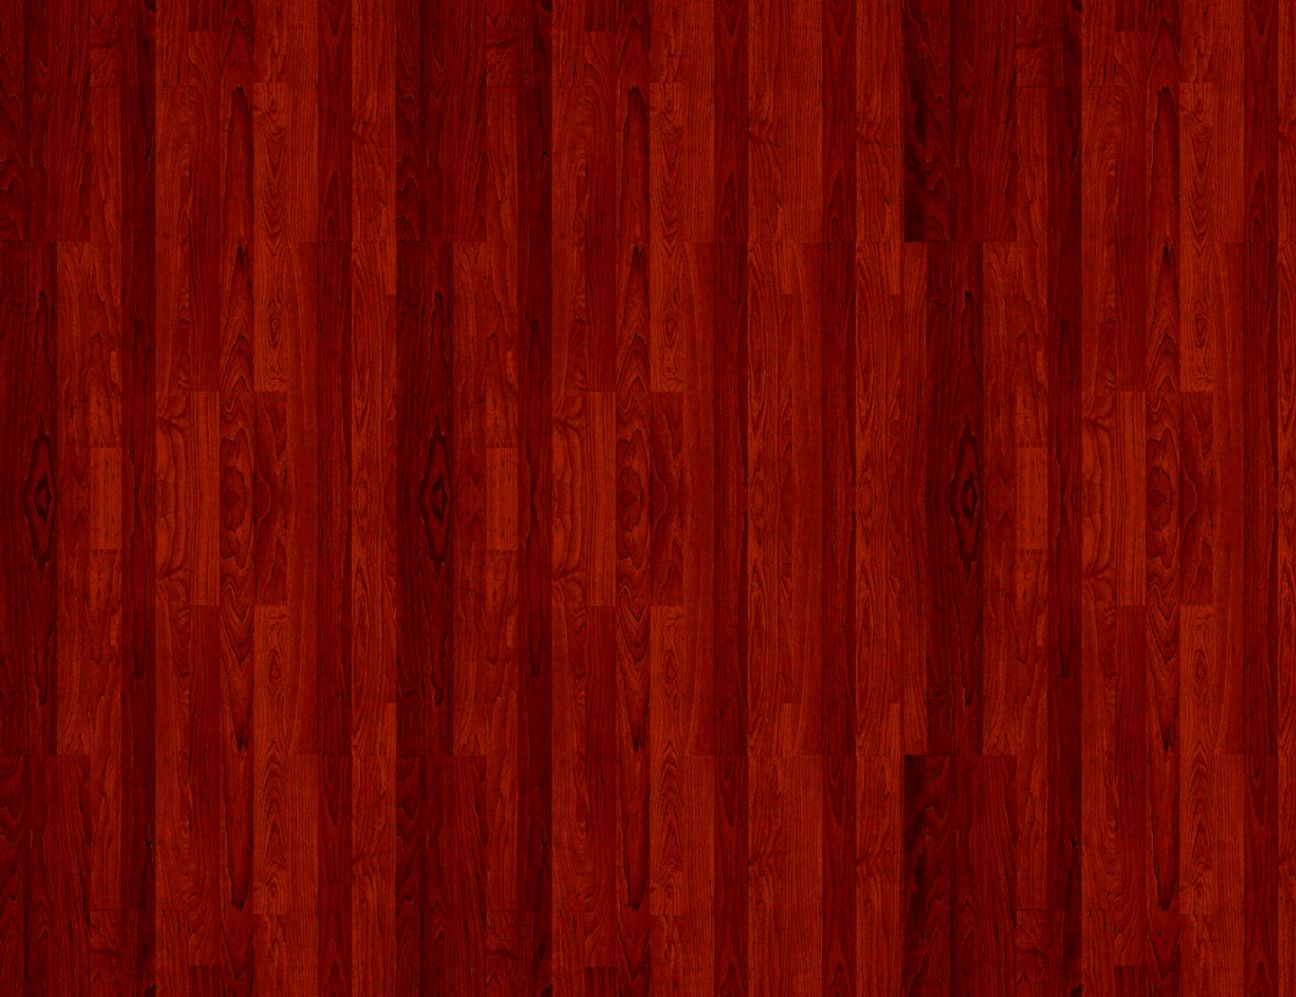 197 Wood Hd Wallpapers Background Images Wallpaper - Plank - 1296x997  Wallpaper 